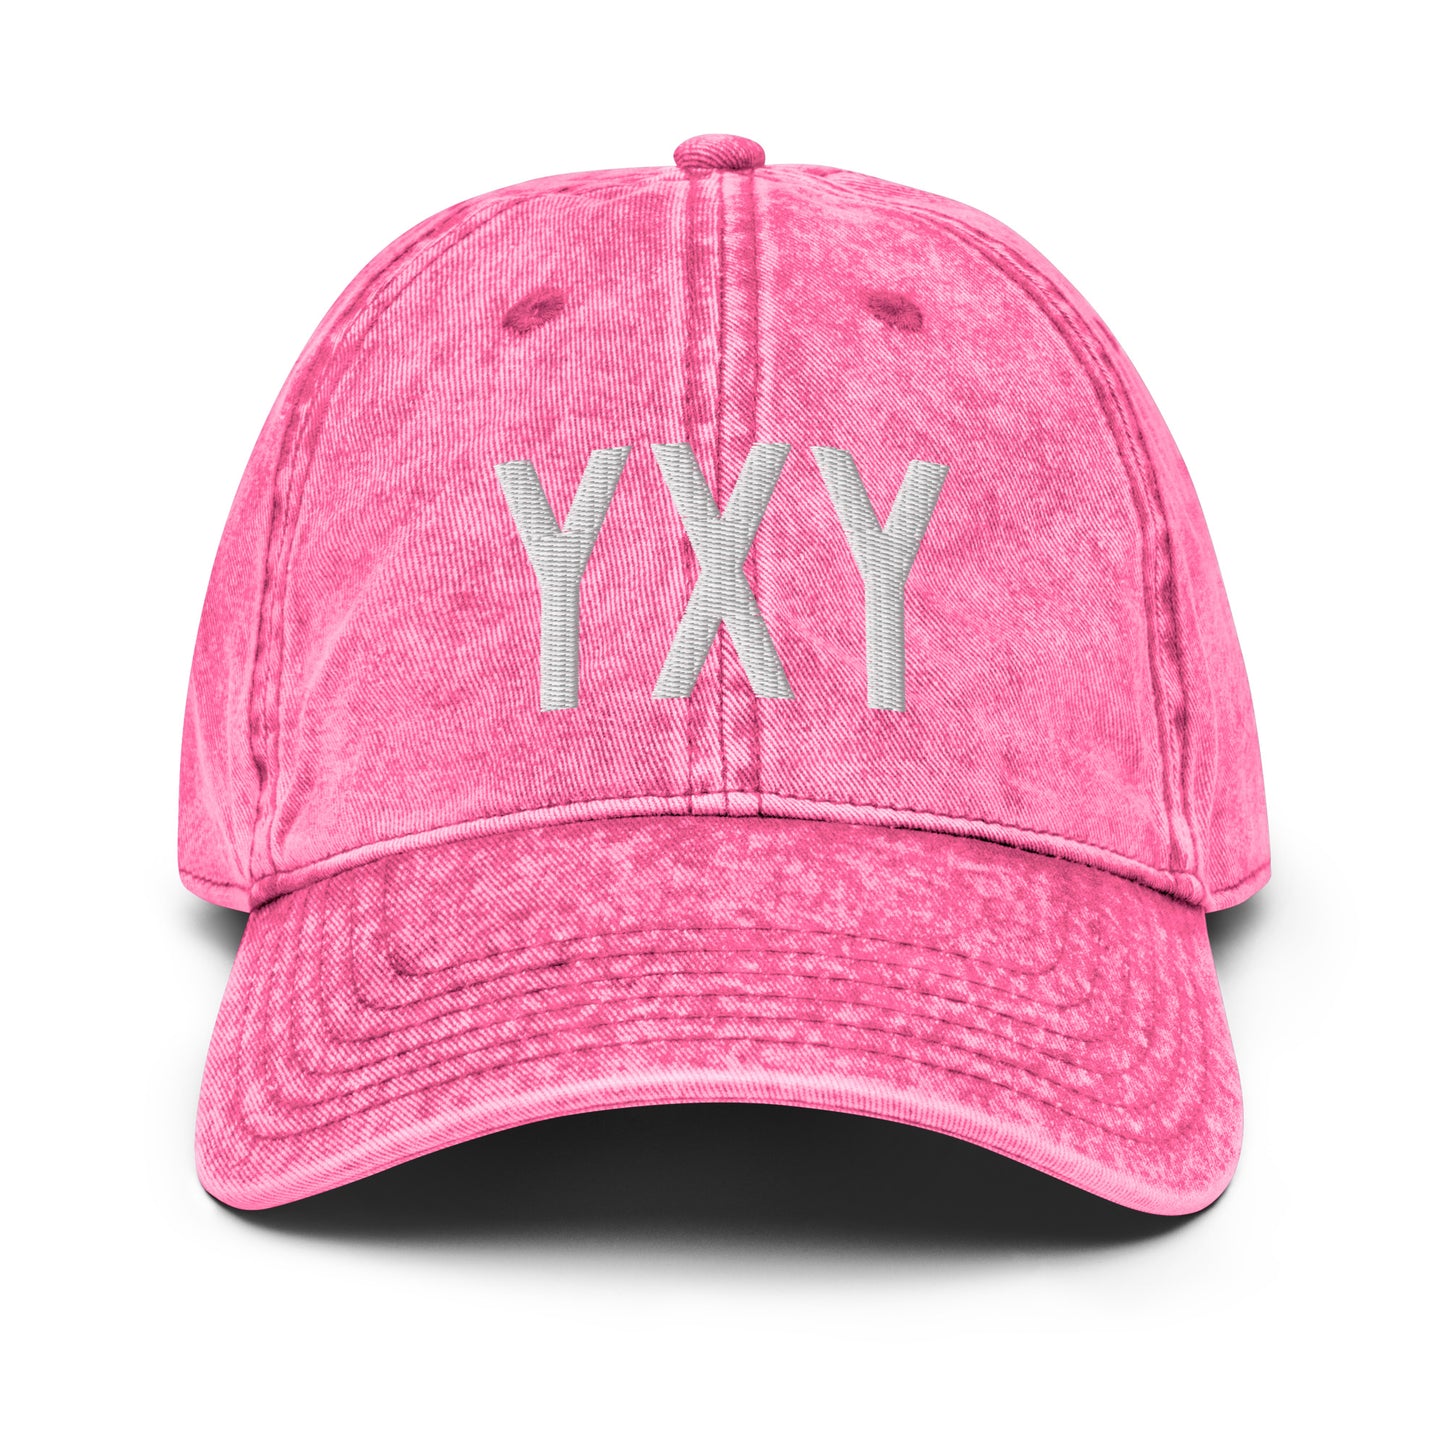 Airport Code Twill Cap - White • YXY Whitehorse • YHM Designs - Image 25